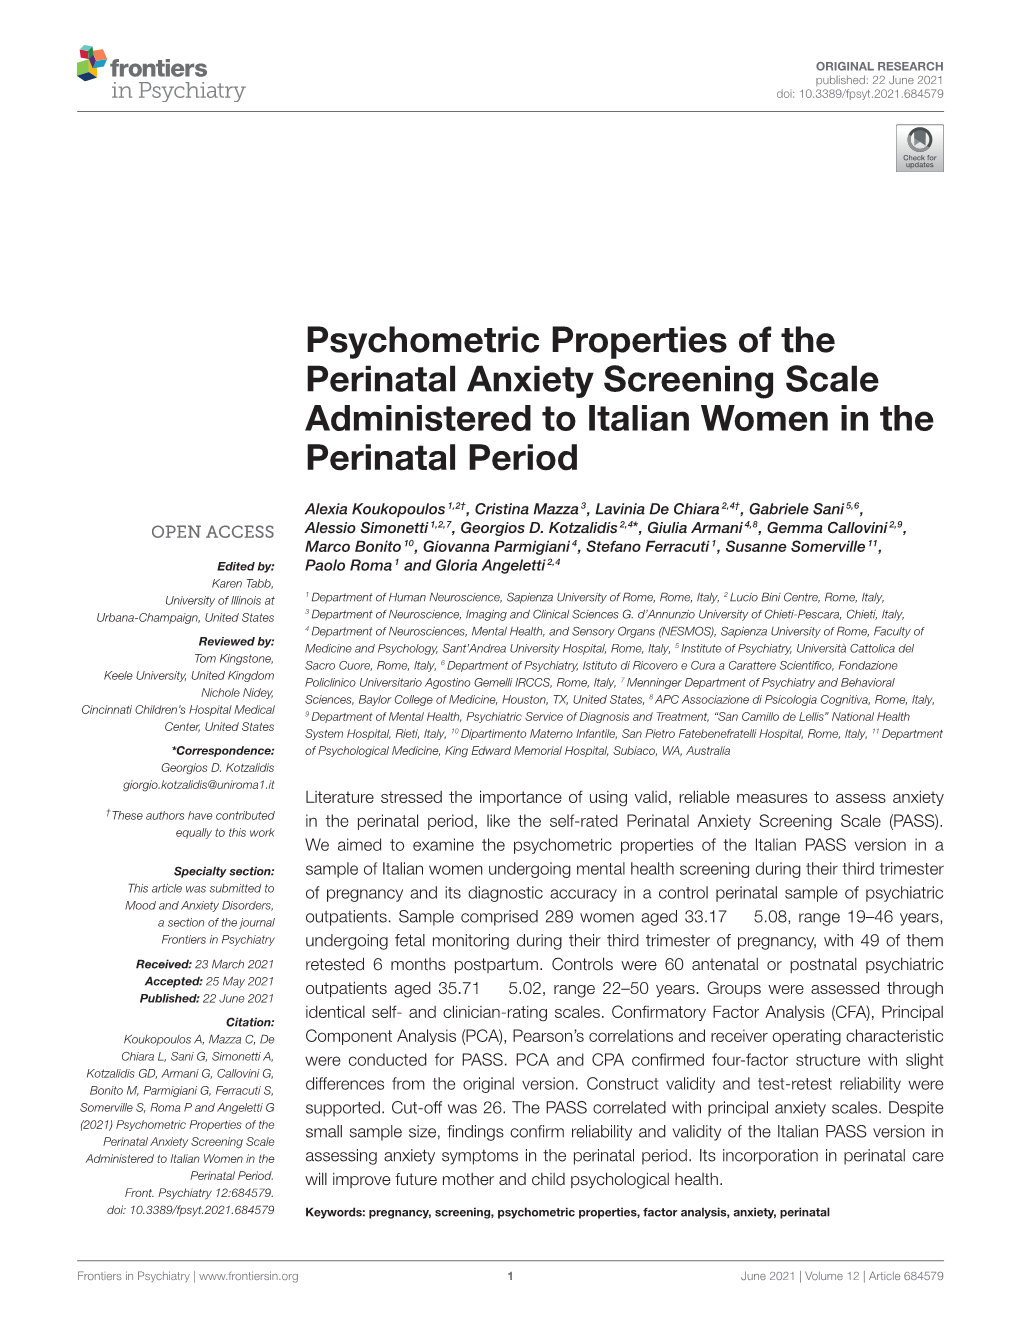 Psychometric Properties of the Perinatal Anxiety Screening Scale Administered to Italian Women in the Perinatal Period